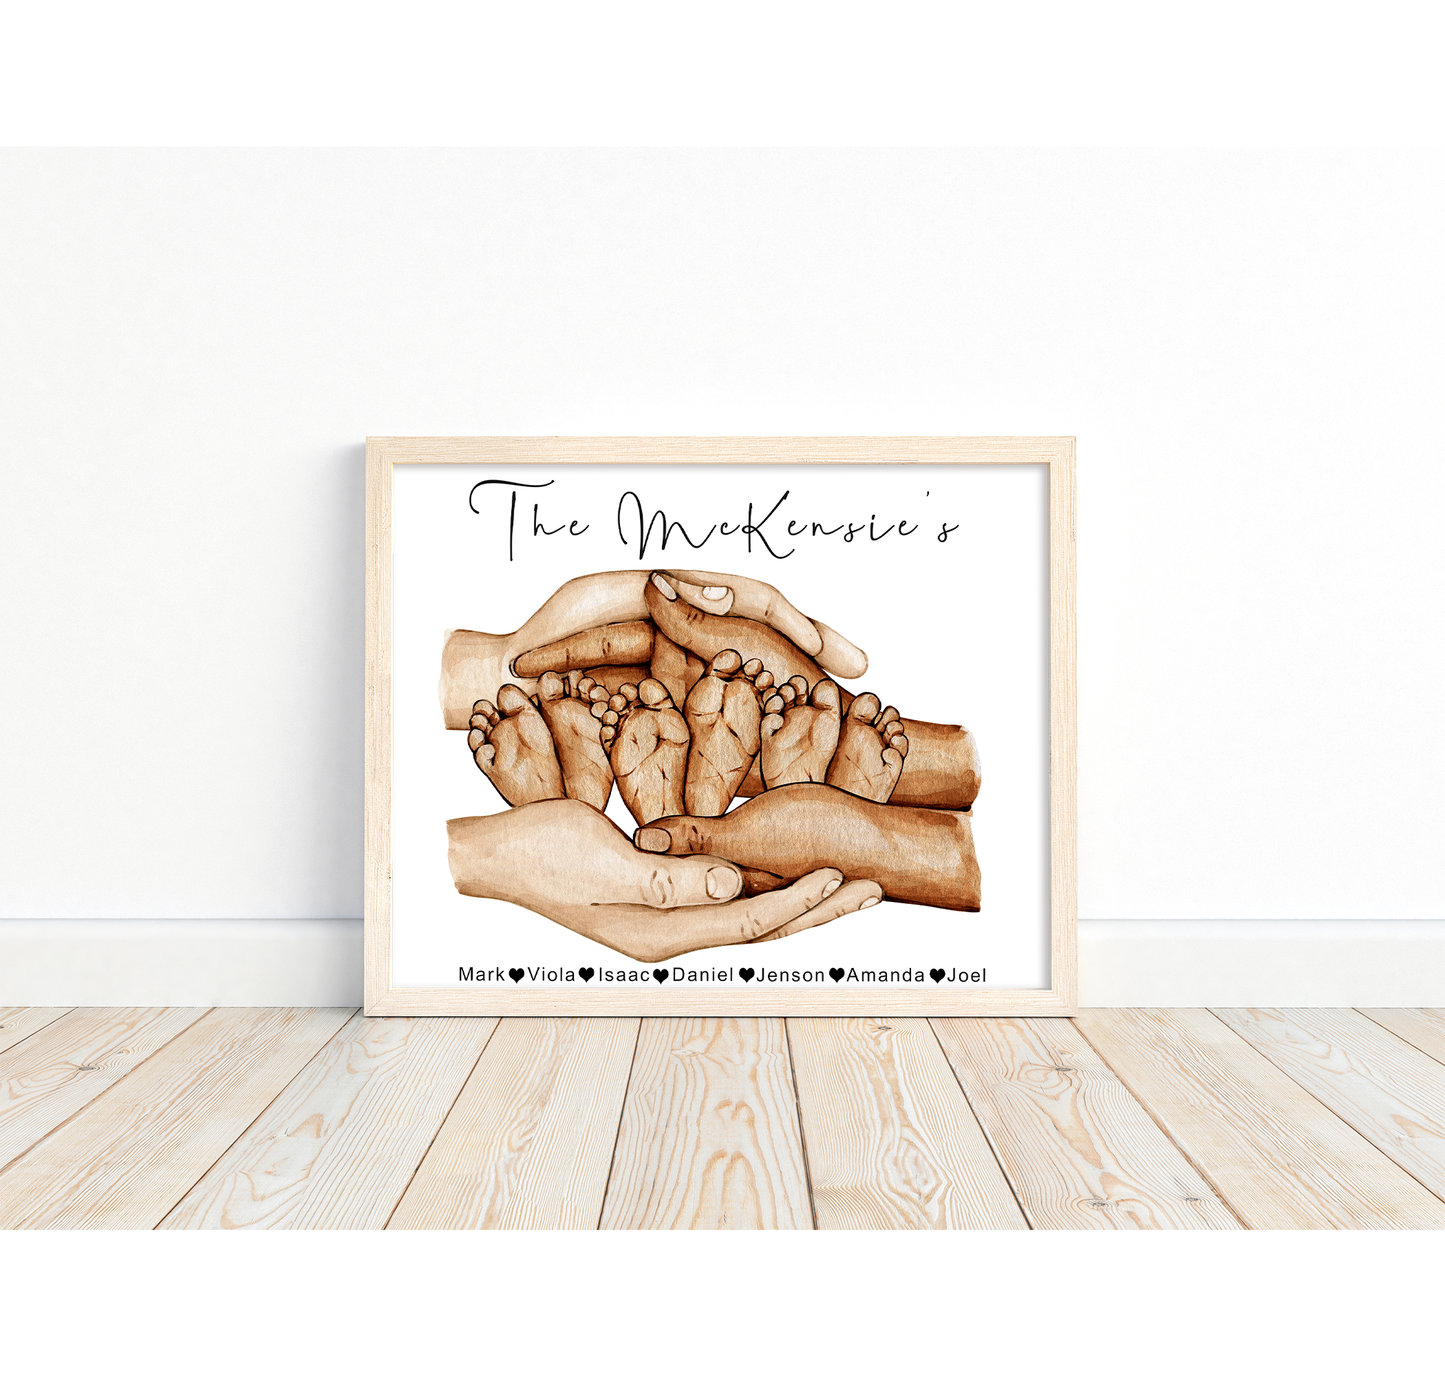 Baby feet in parents hands | New parents portrait with baby, twins or triplets | Natural skin tones or Black and white | A3 | A4 | A5 | Greeting card